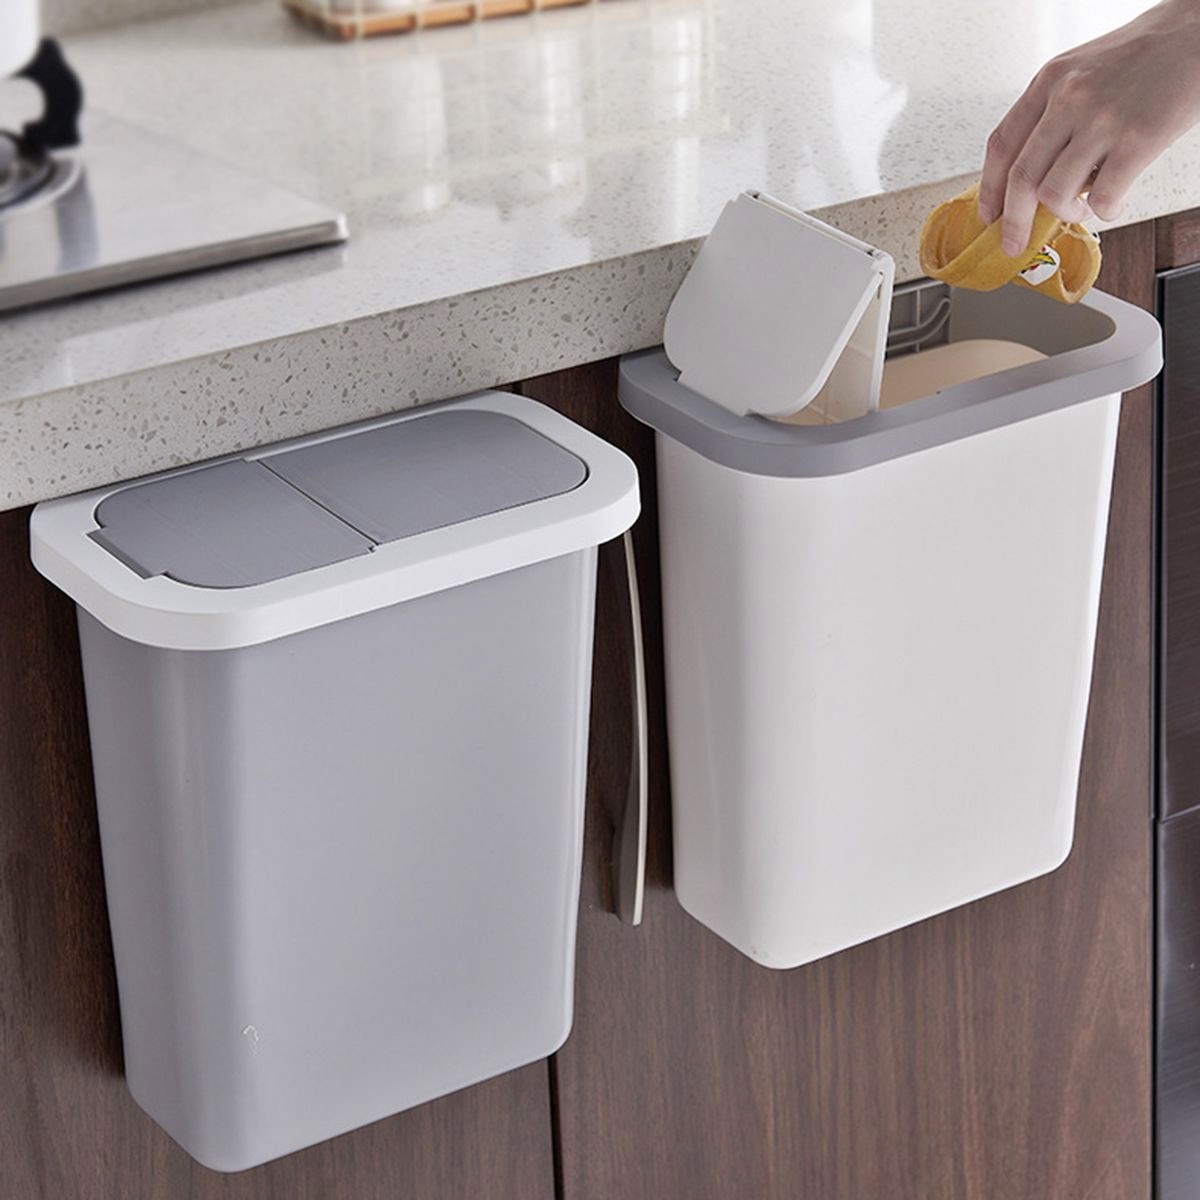 What Size Of Trash Can Fits Under Sink